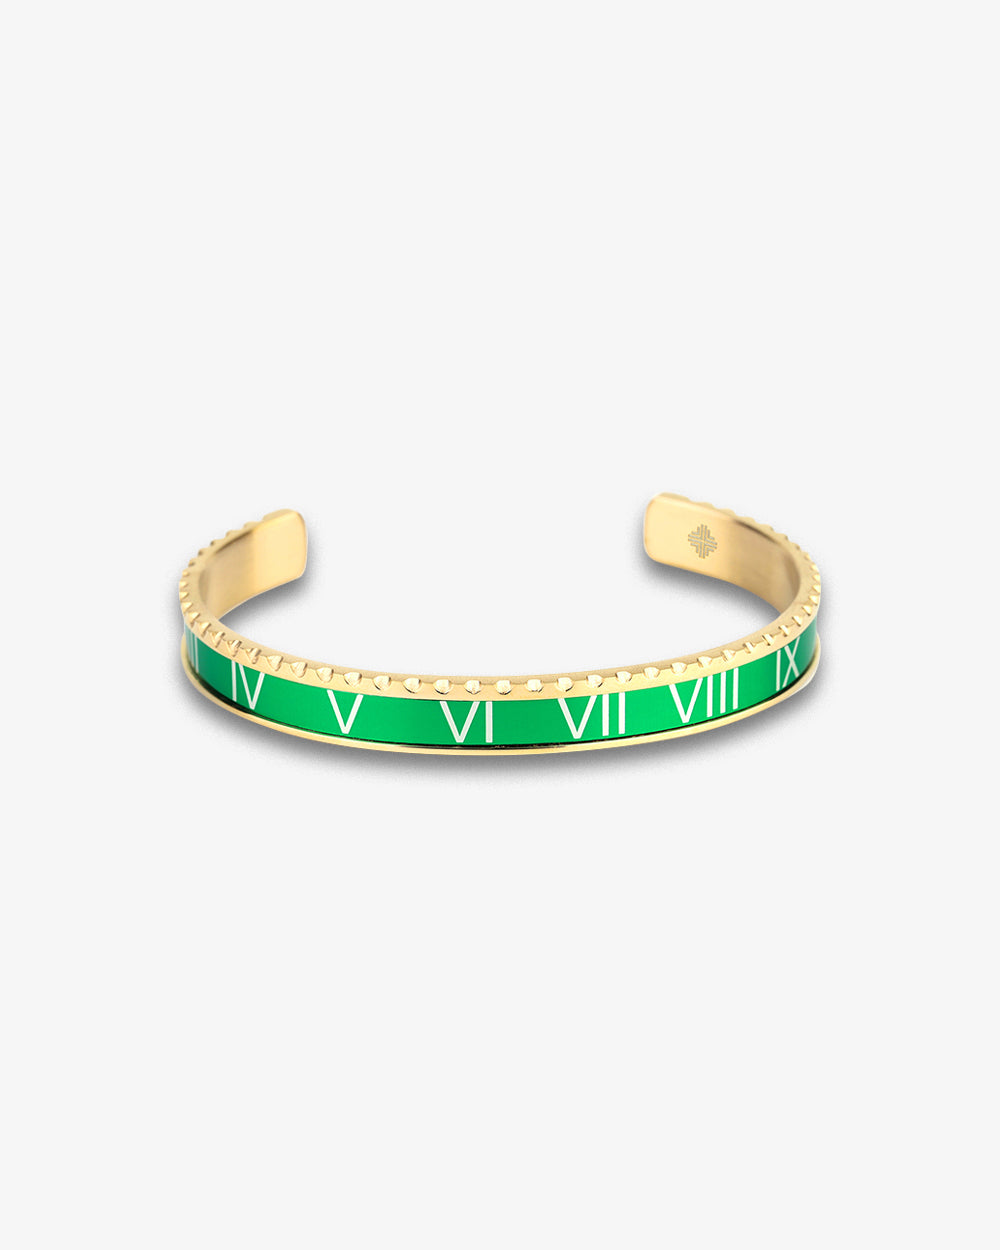 SWISS CONCEPT Classic Roman Numeral Speed Bracelet (Green & Yellow Gold) - Stainless Steel